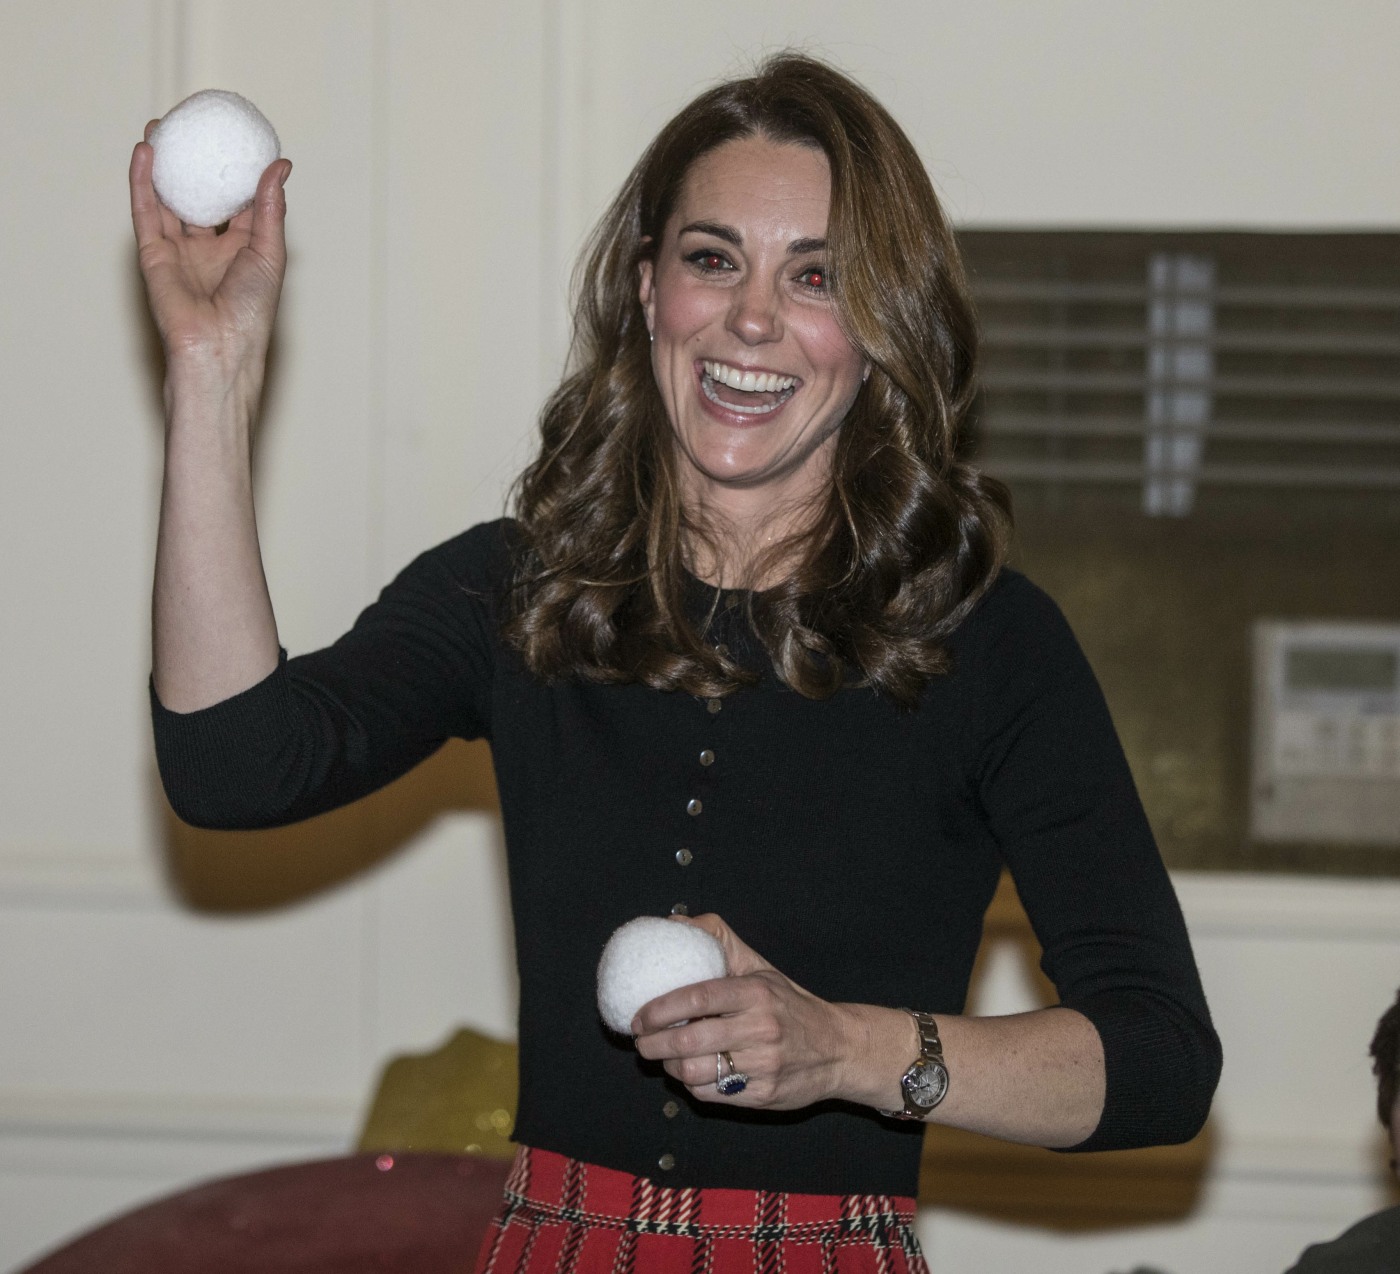 The Duchess of Cambridge throws a mock snowball as she takes part in a children's pretend snow ball fight during a Christmas party held at Kensington palace for families and children of deployed personnel from RAF Coningsby and RAF Marham serving in Cyprus. The Duke is Honorary Air Commandant of RAF Coningsby, Lincolnshire, which is home to Typhoon Sqns, who currently deploy to Cyprus in support of Op SHADER. RAF Marham have 31 Squadron, who are also contributing to OP SHADER. The event is being supported by The Royal British Legion in recognition of the unique contribution and sacrifices Serving personnel and their families make year round, and especially when they are separated during the festive period. The support of their families and loved ones is vital not only when personnel are serving, but through transition, recovery and civilian life after service, and The Royal British Legion ensures that those family members are supported in return.